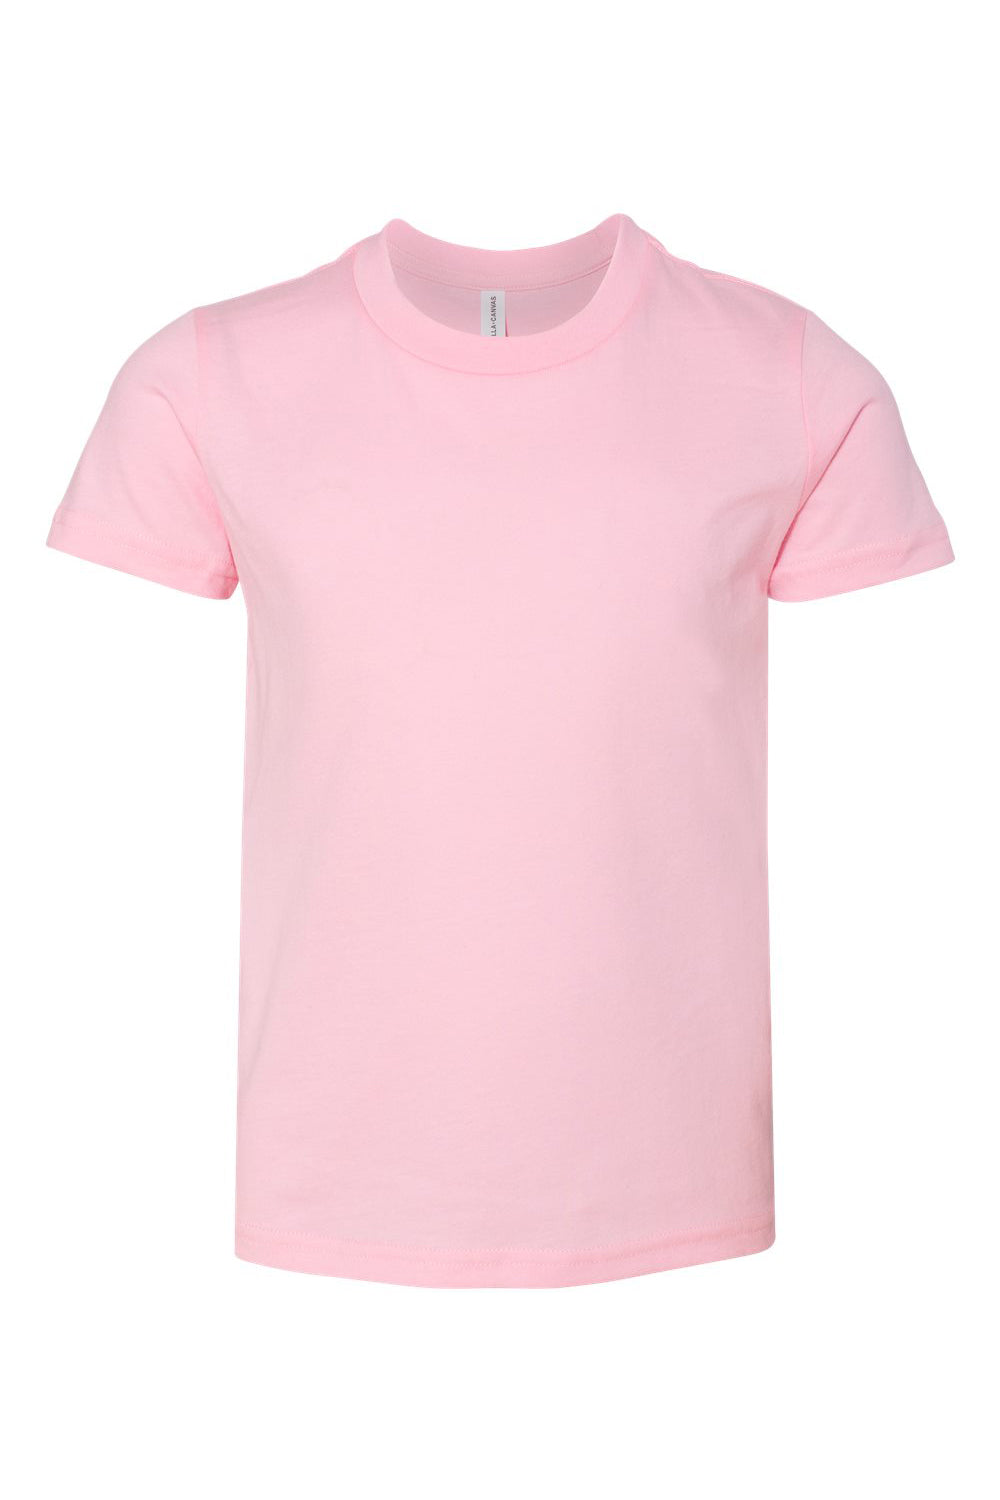 Bella + Canvas 3001Y Youth Jersey Short Sleeve Crewneck T-Shirt Pink Flat Front